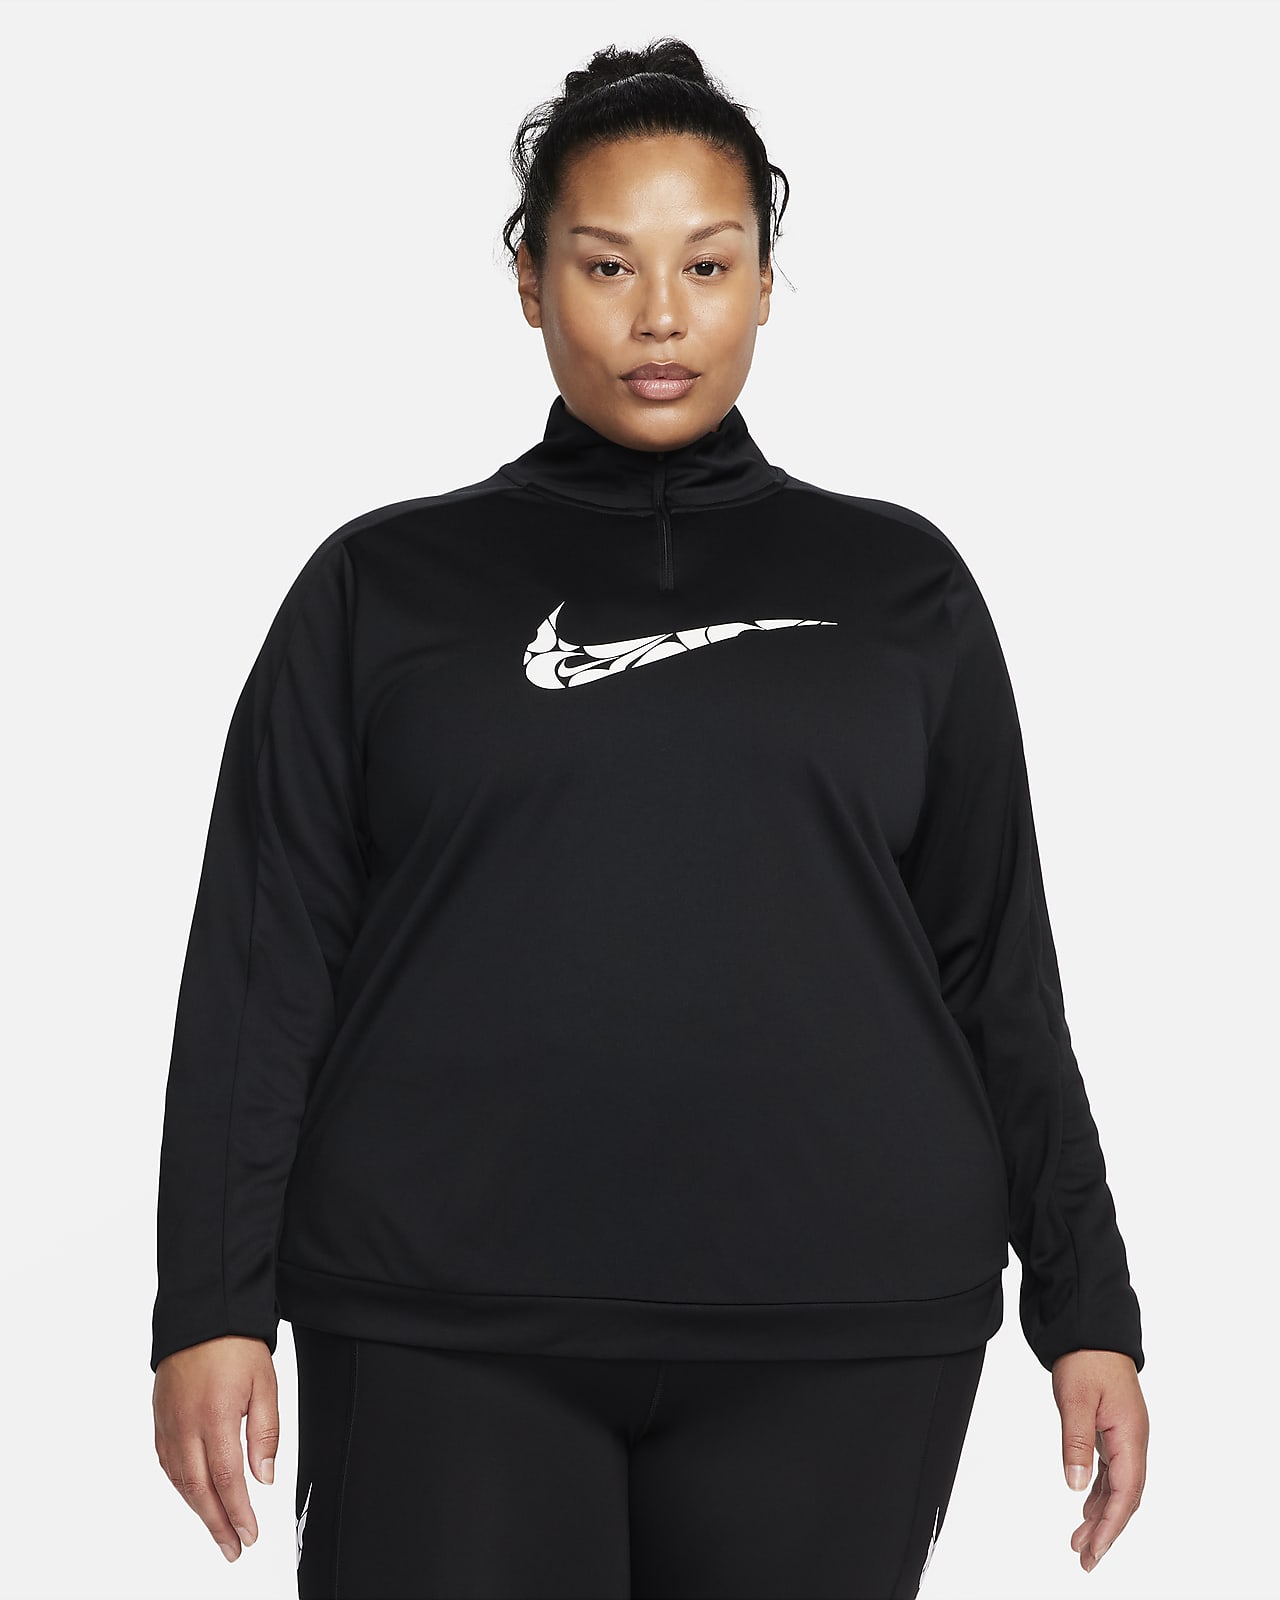 https://static.nike.com/a/images/t_PDP_1280_v1/f_auto,q_auto:eco/3fe6ff2d-7bb8-4e53-8a96-d3fe747844a4/swoosh-dri-fit-1-4-zip-mid-layer-rTmHb7.png